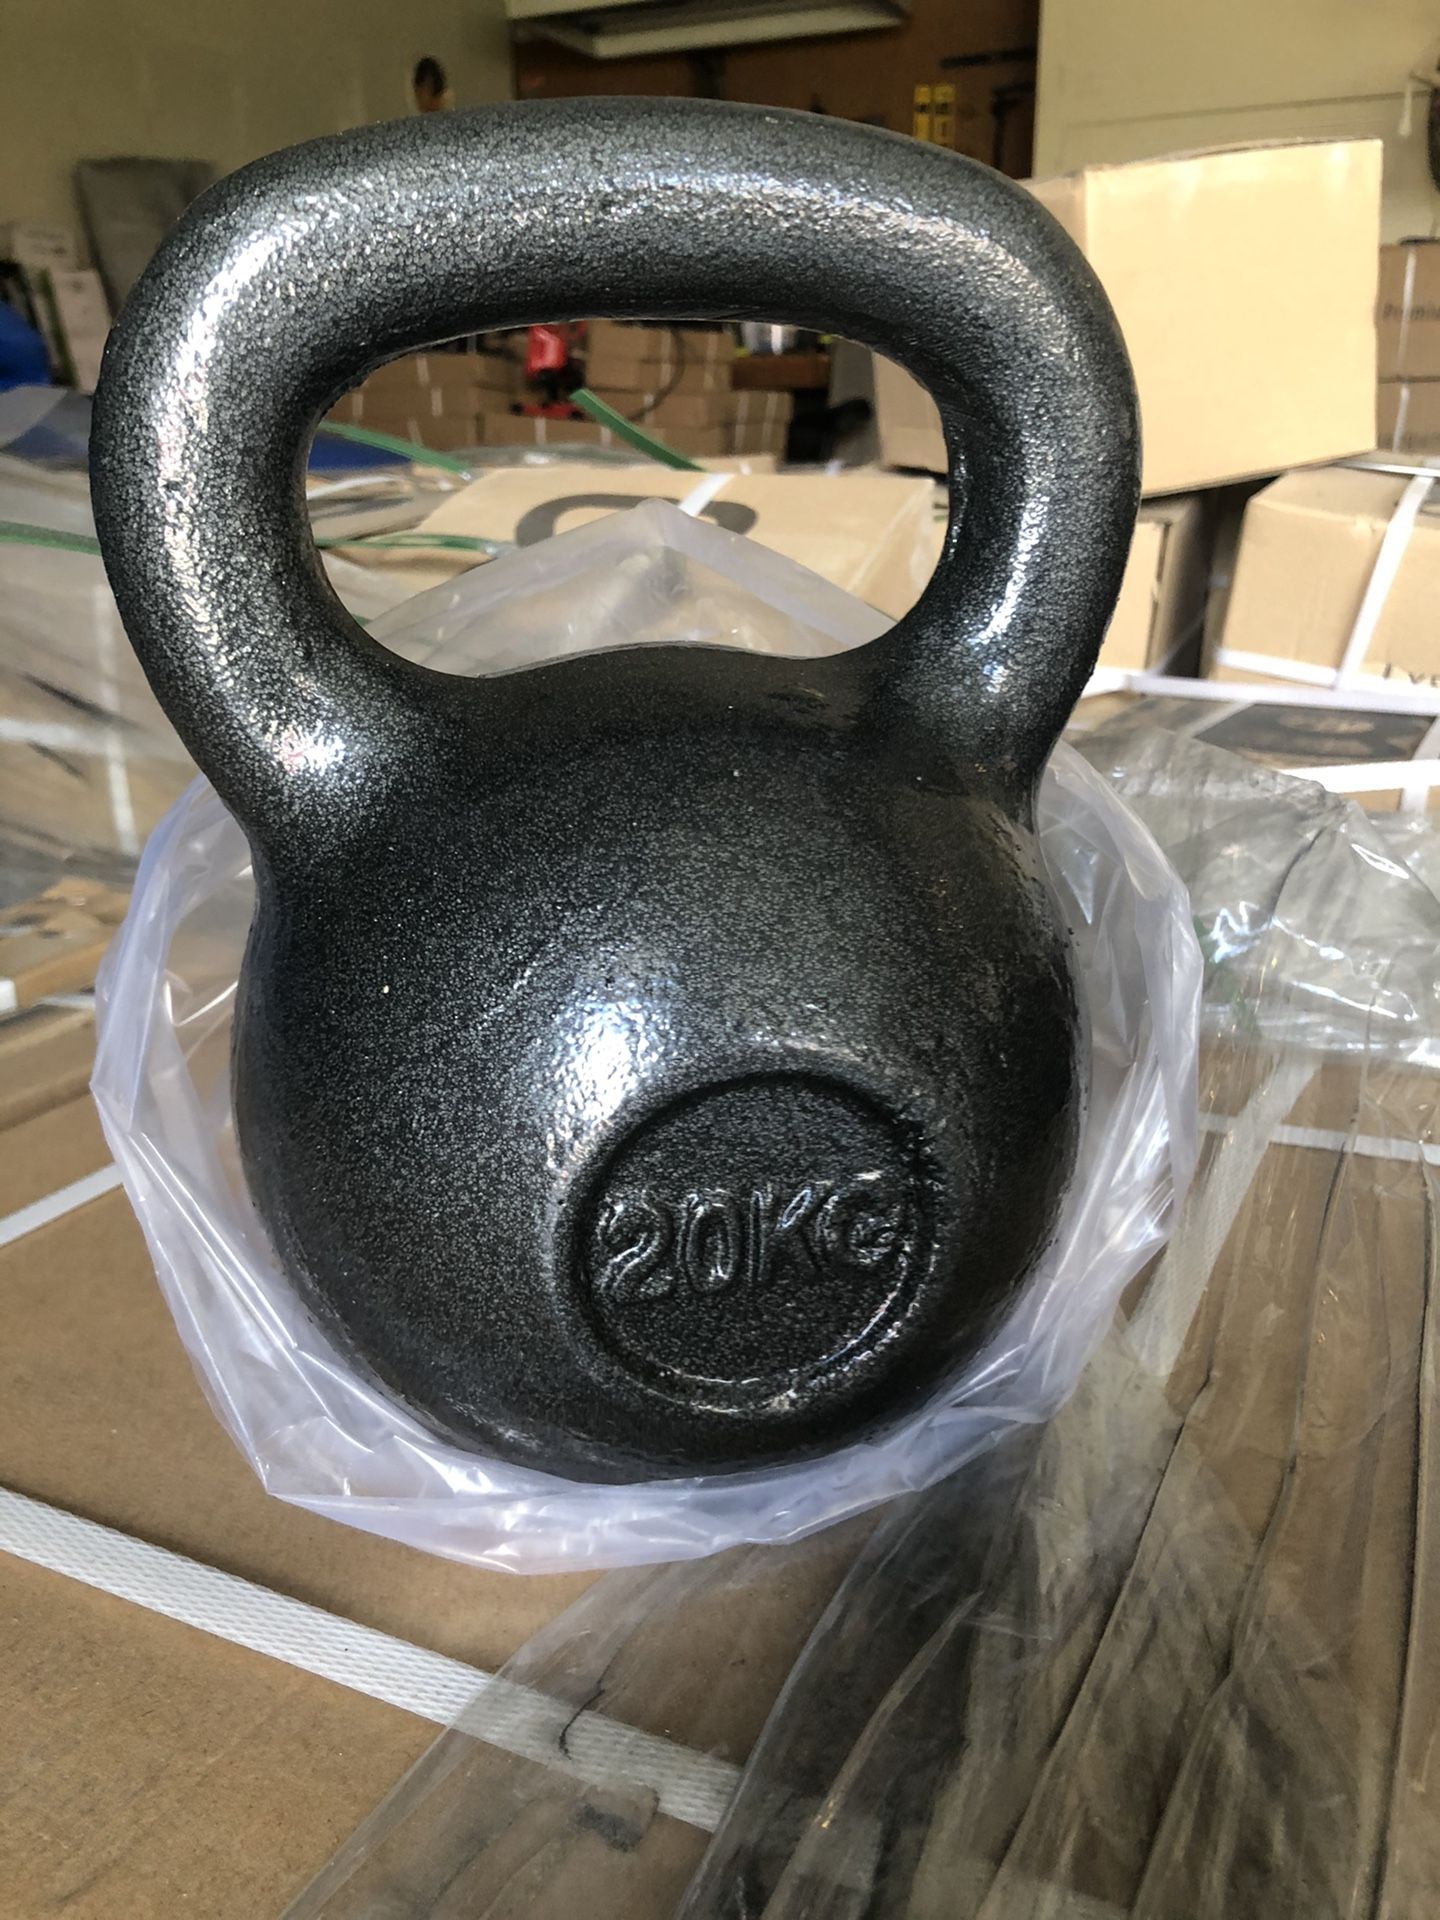 45lb 20kg Kettlebell Kettle Bell Crossfit Home Gym Workout Weights